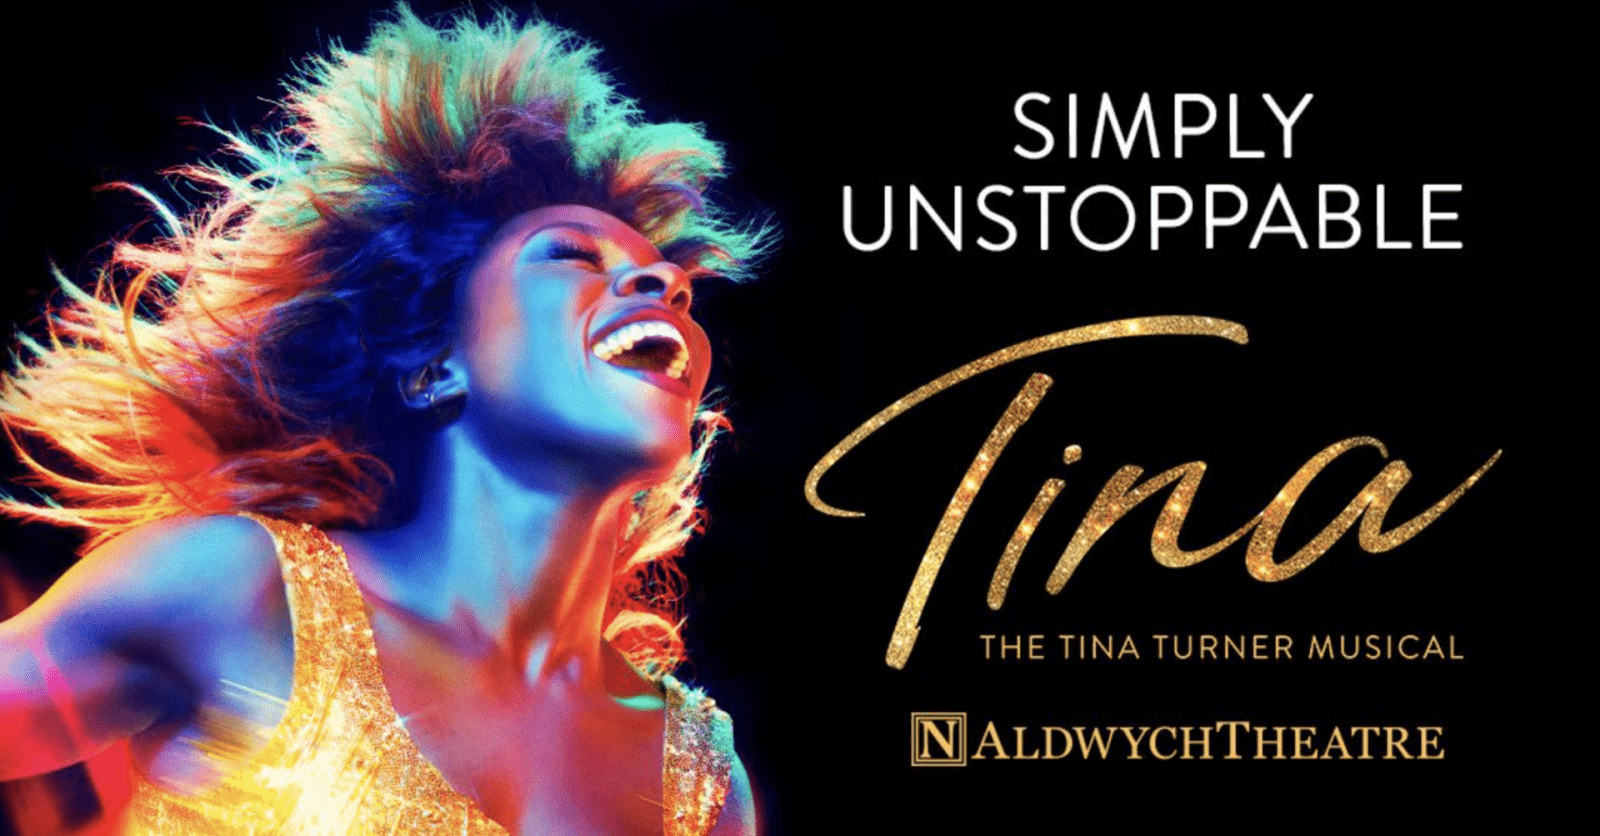 From humble beginnings in Nutbush, Tennessee, to her transformation into the global Queen of Rock ‘n’ Roll, Tina Turner didn’t just break the rules, she rewrote them